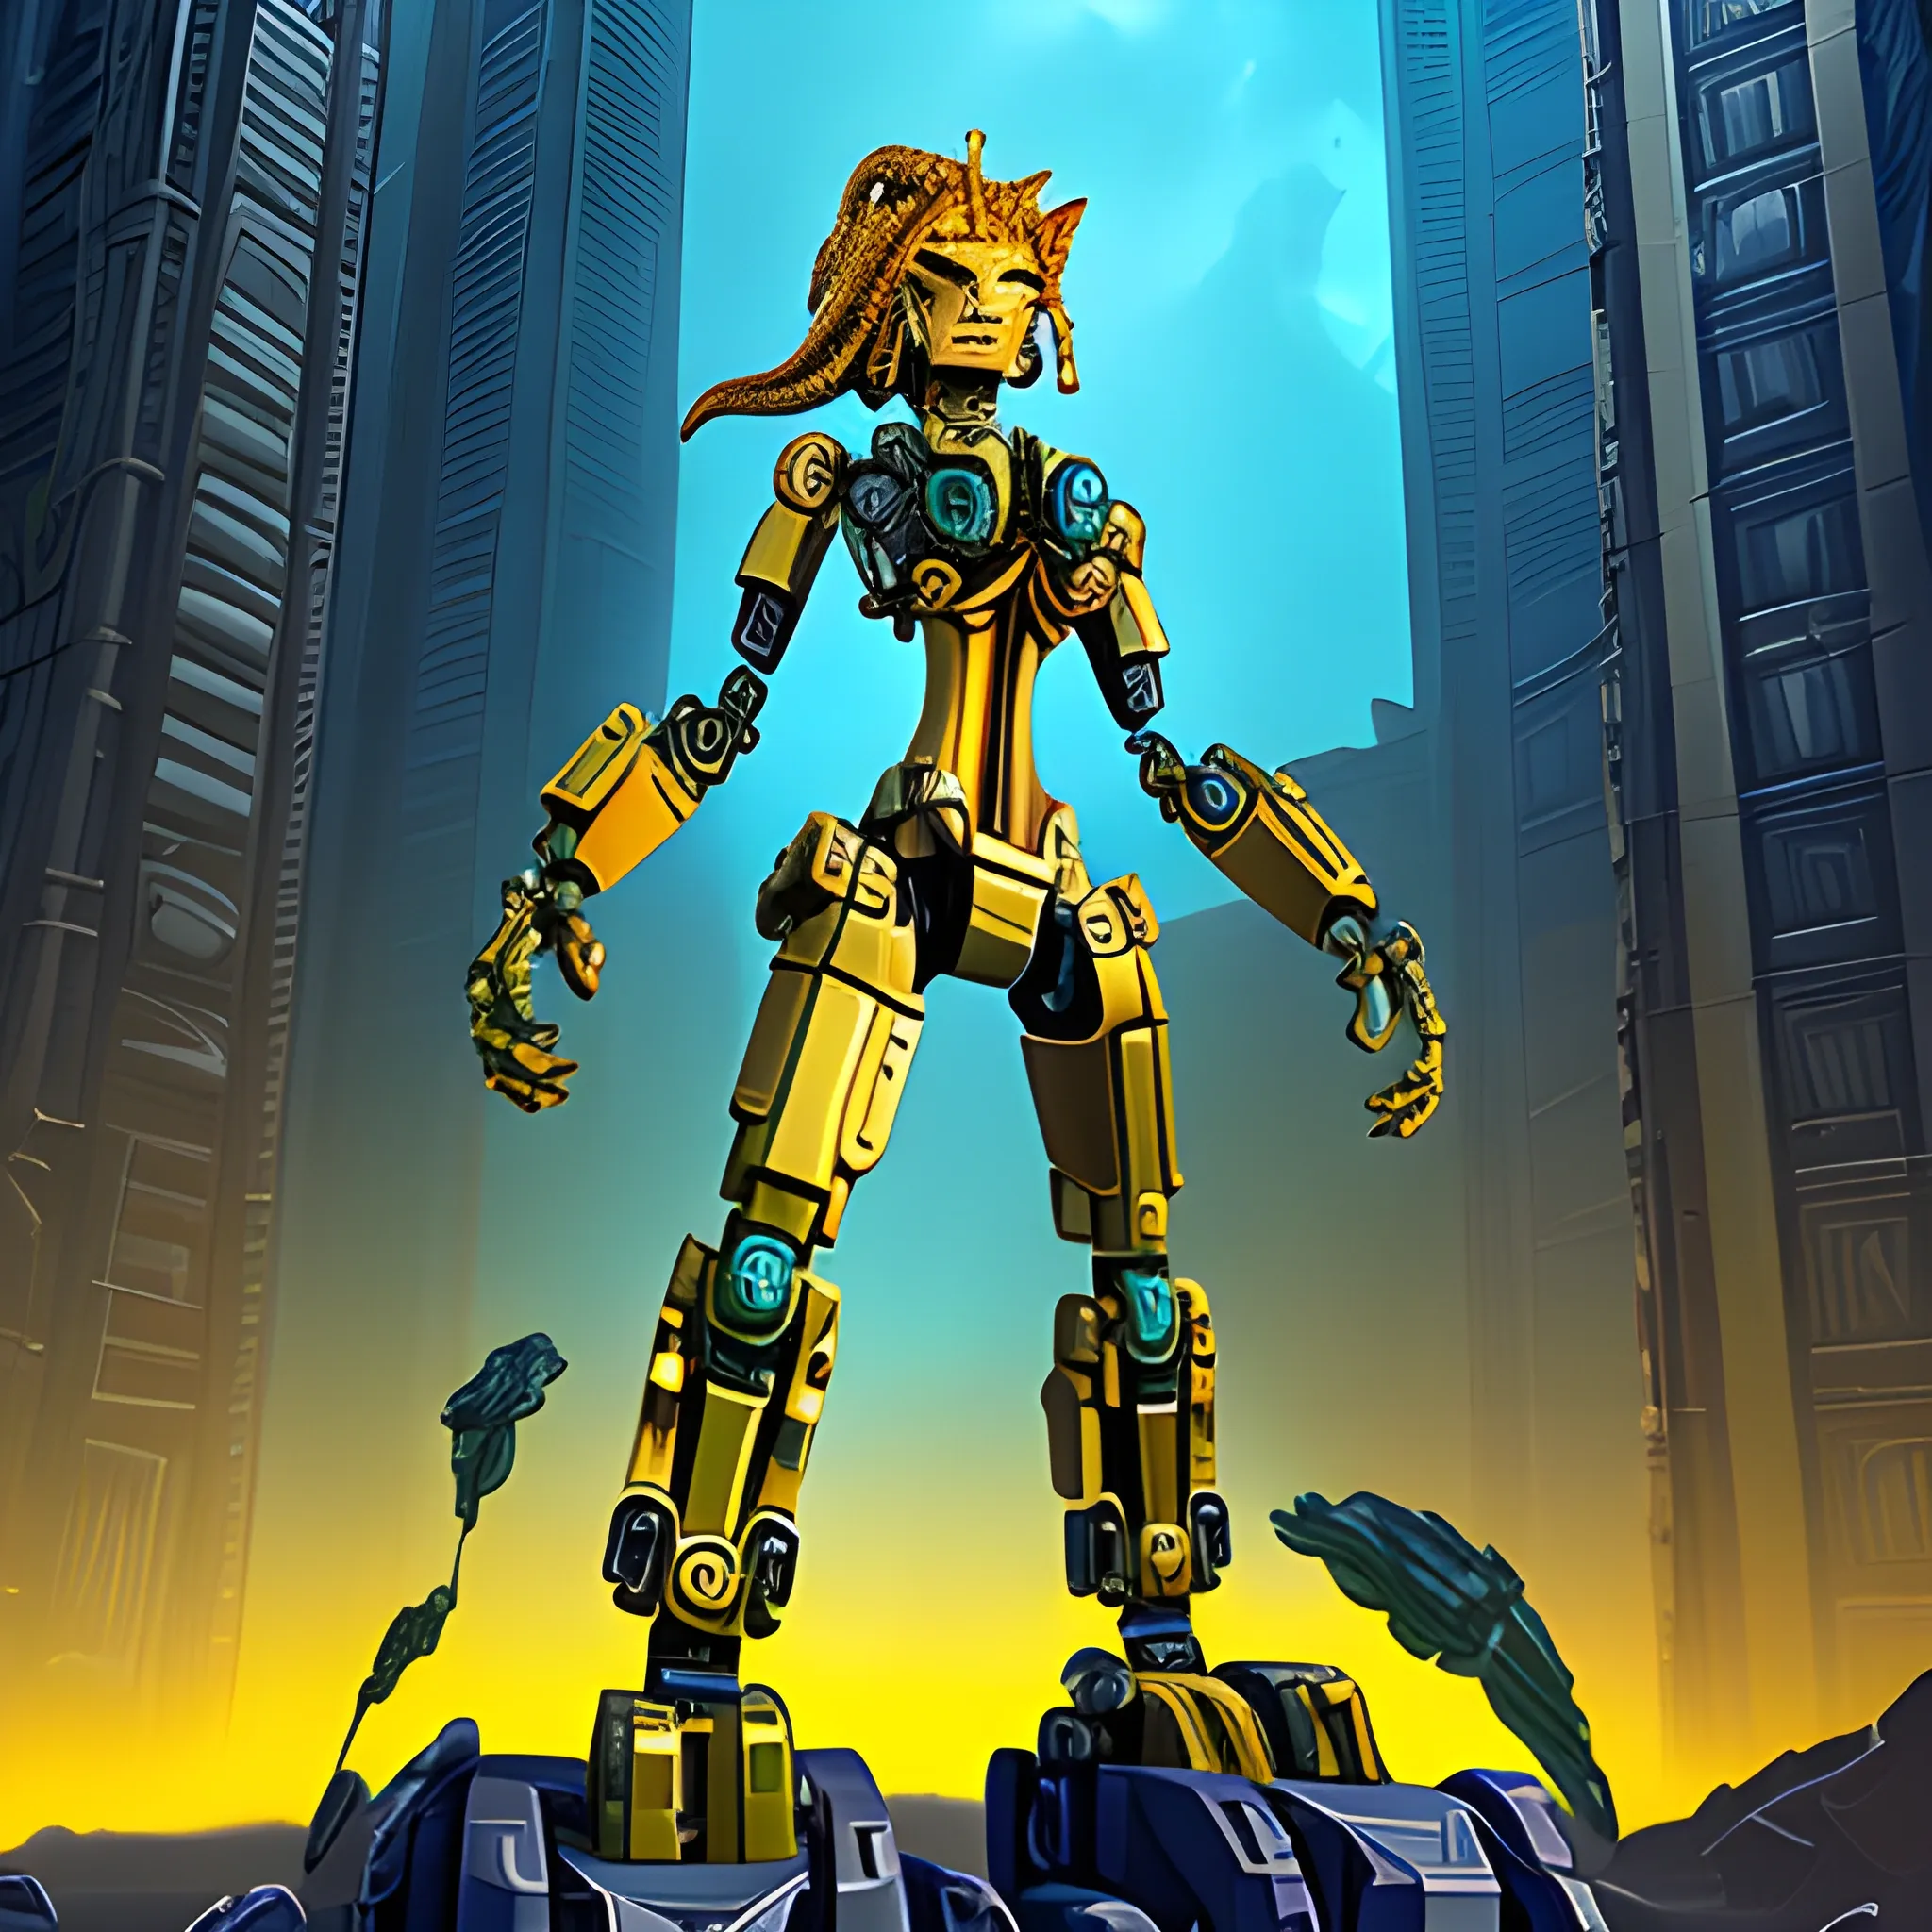 bionicle lion woman living in a jungle city

